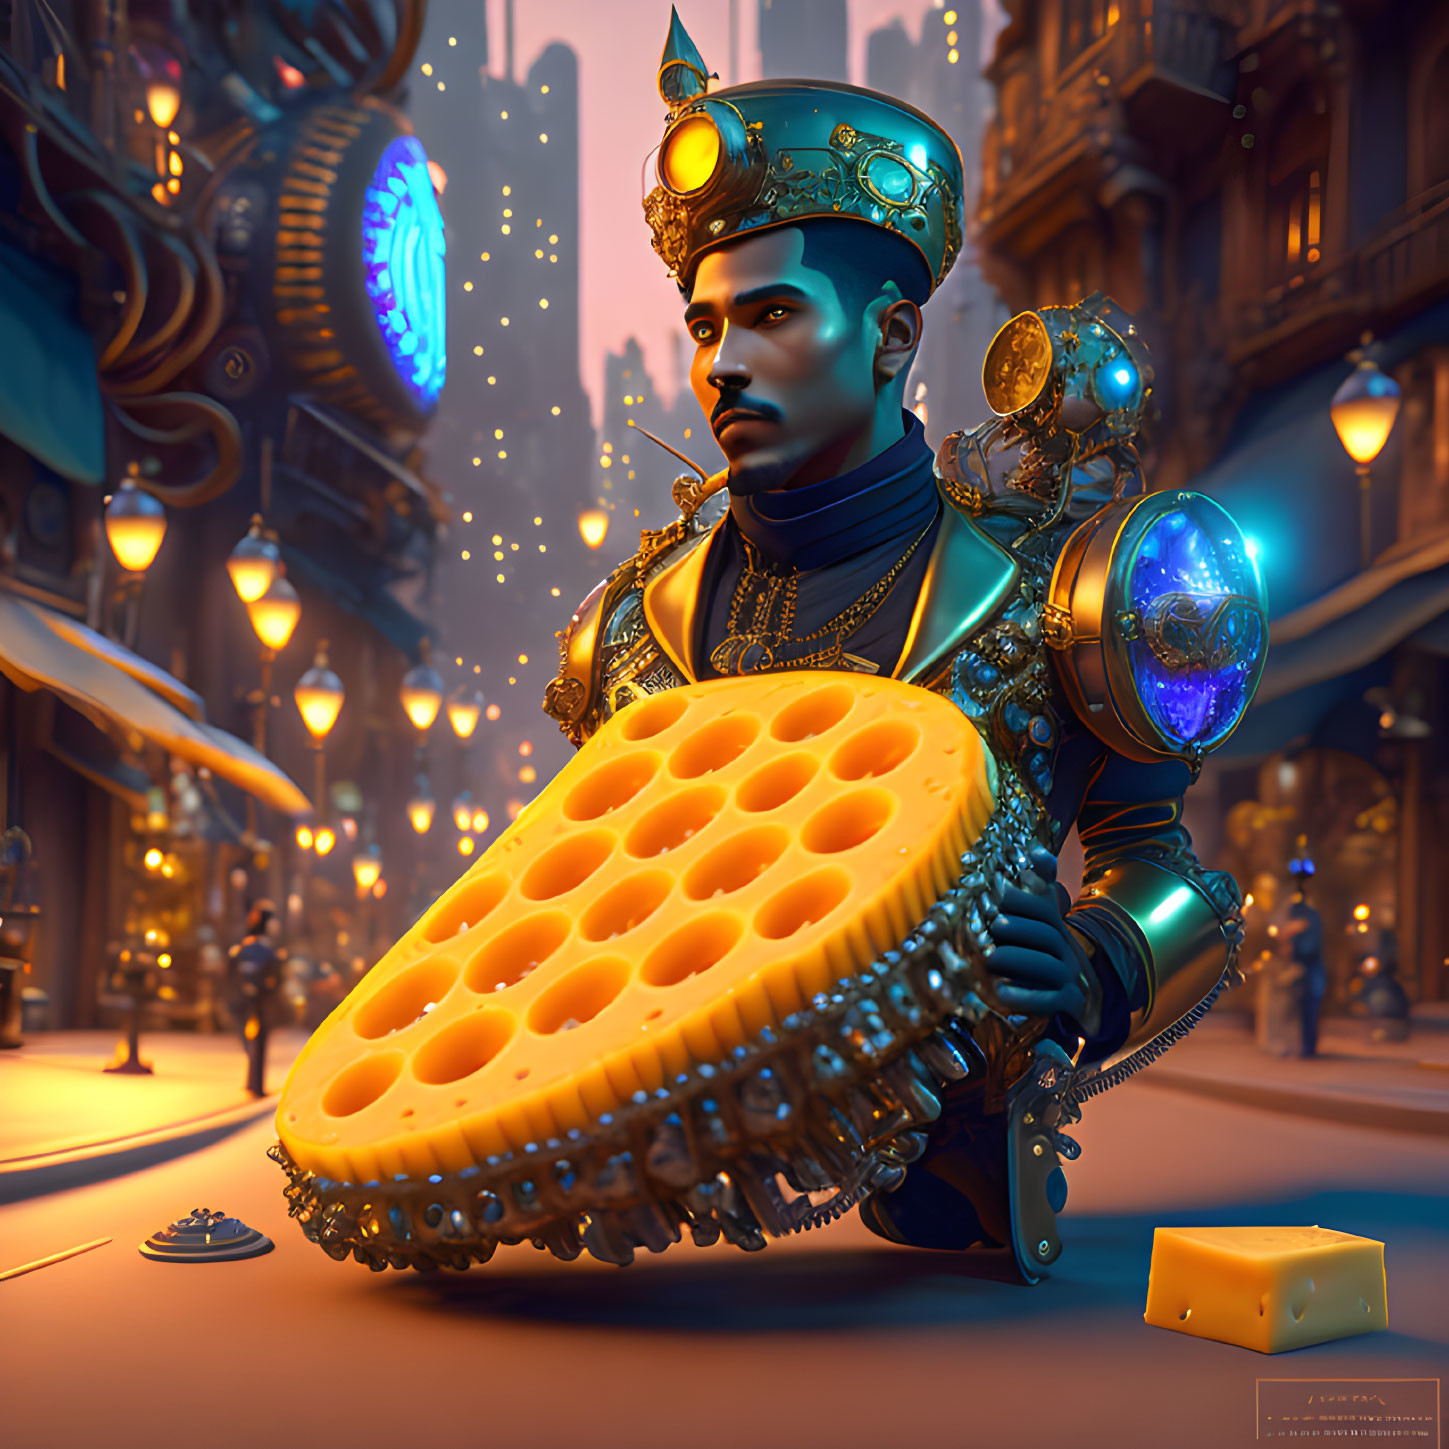 Steampunk-themed character with oversized golden waffle and intricate mechanical details